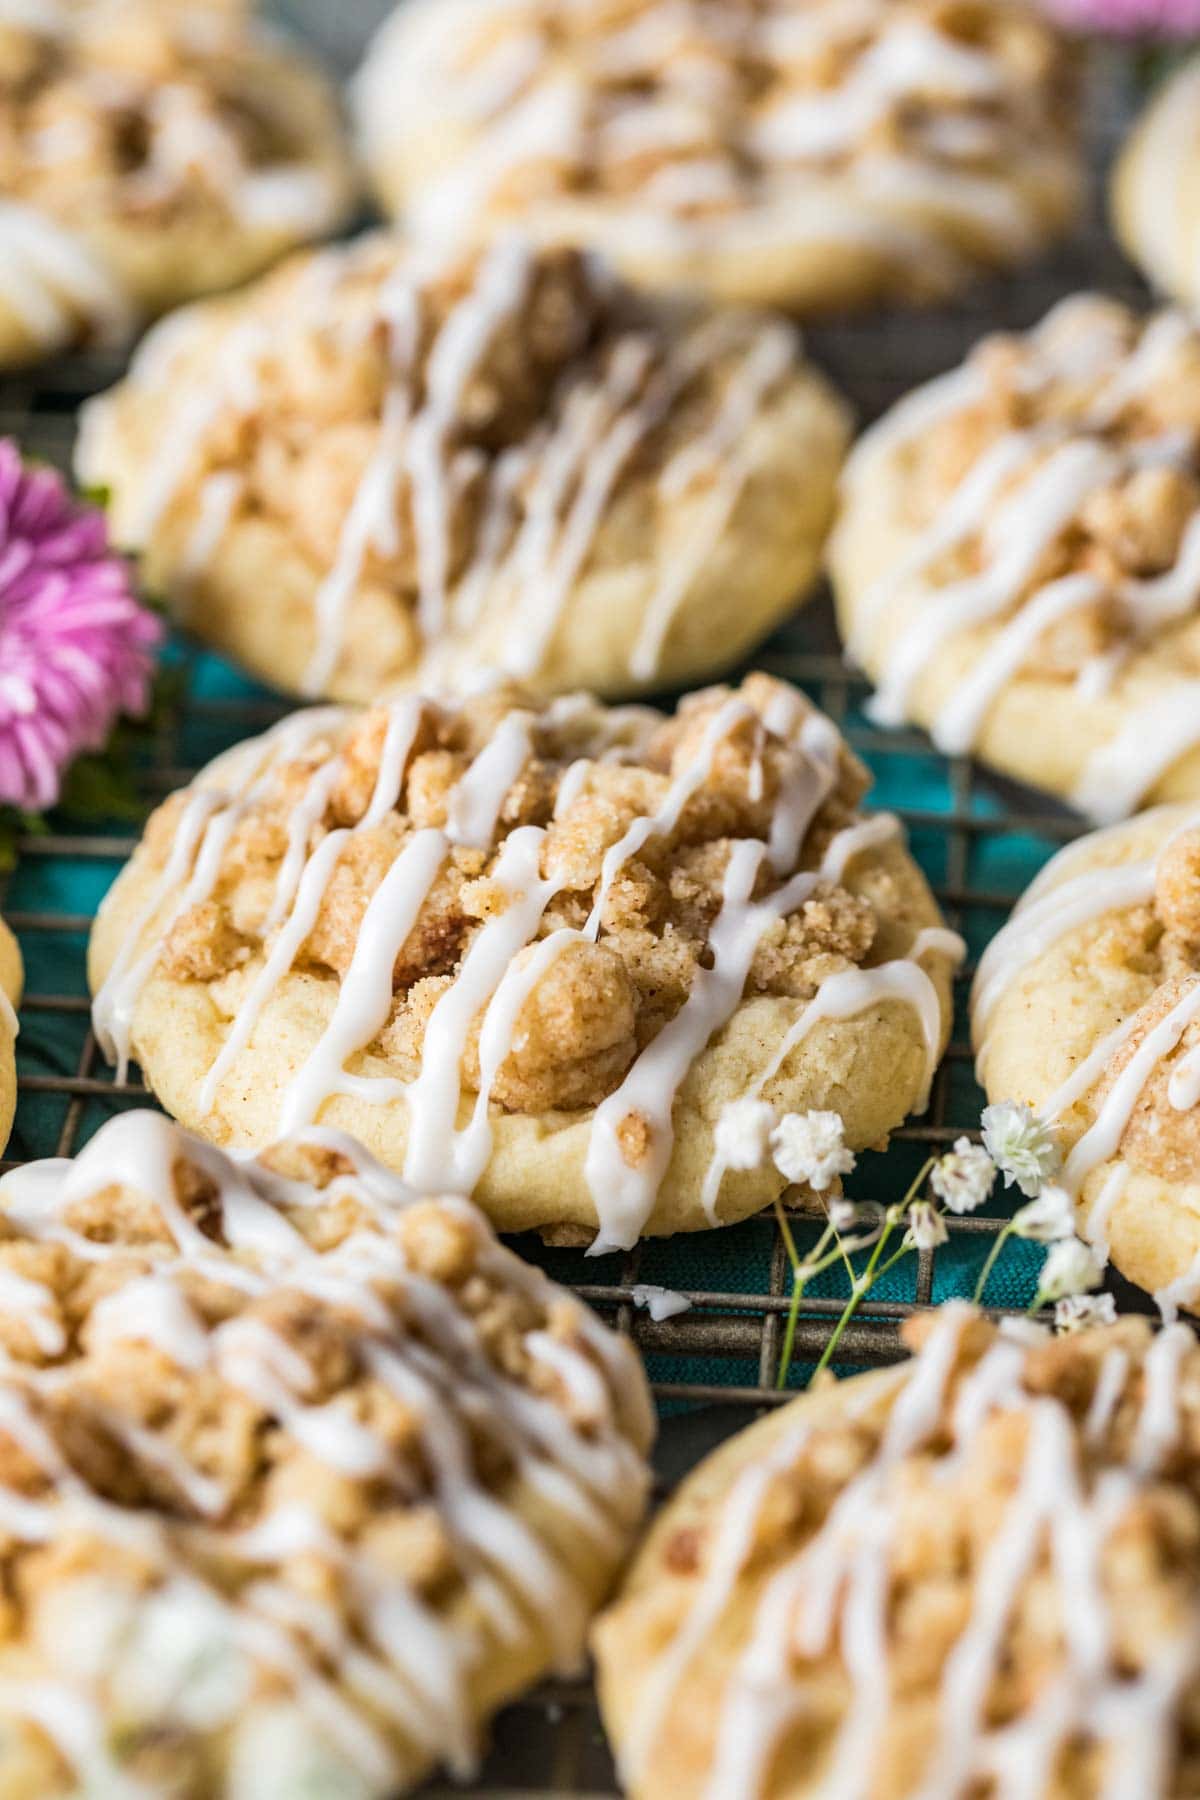 Cookies that have been topped with streusel and a drizzle of glaze to mimic coffee cake.